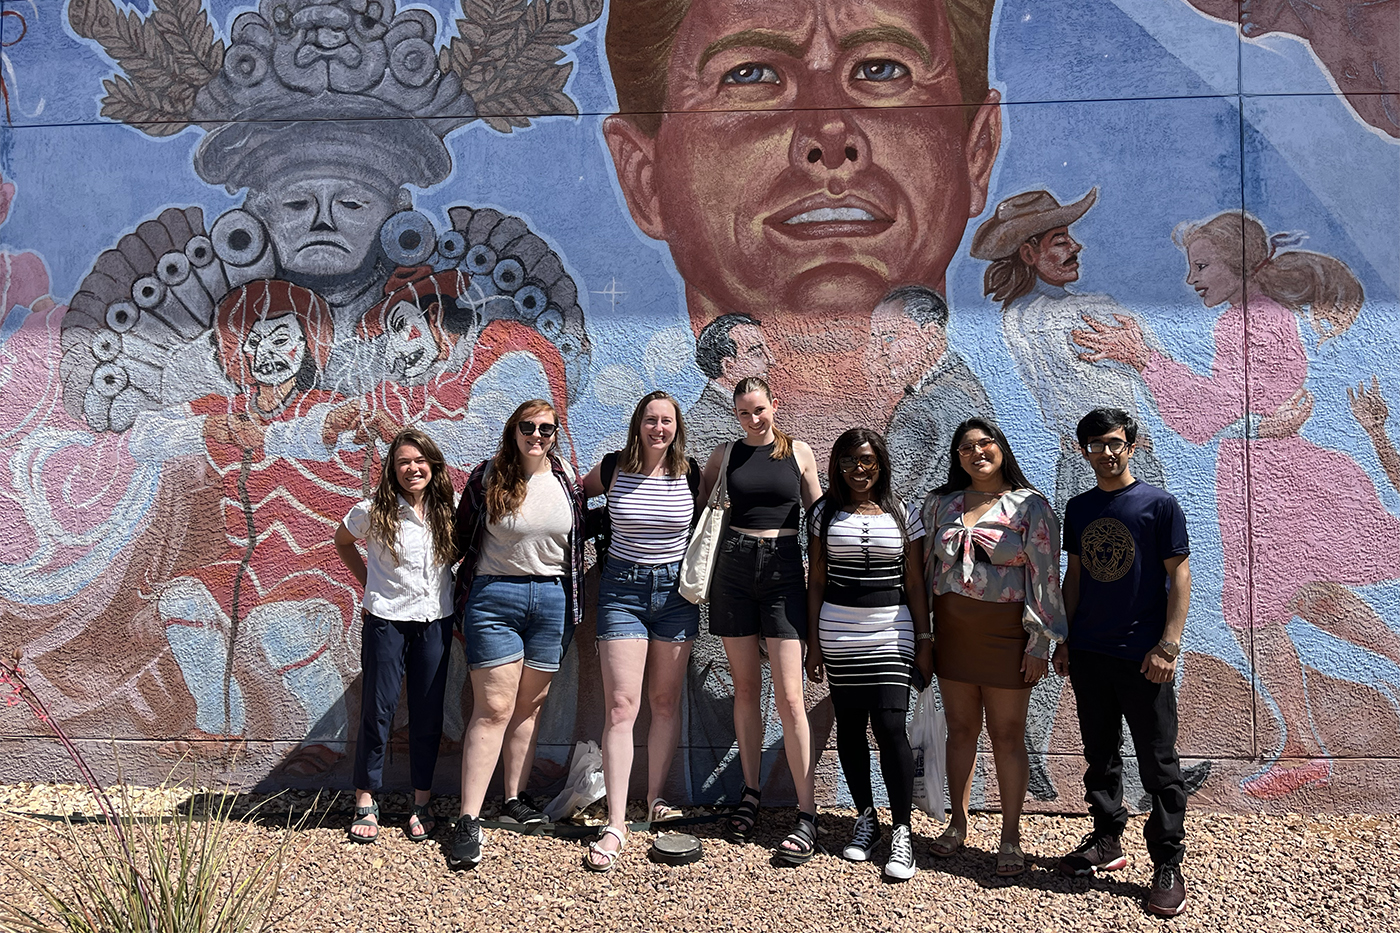 students posing in front of wall with mural